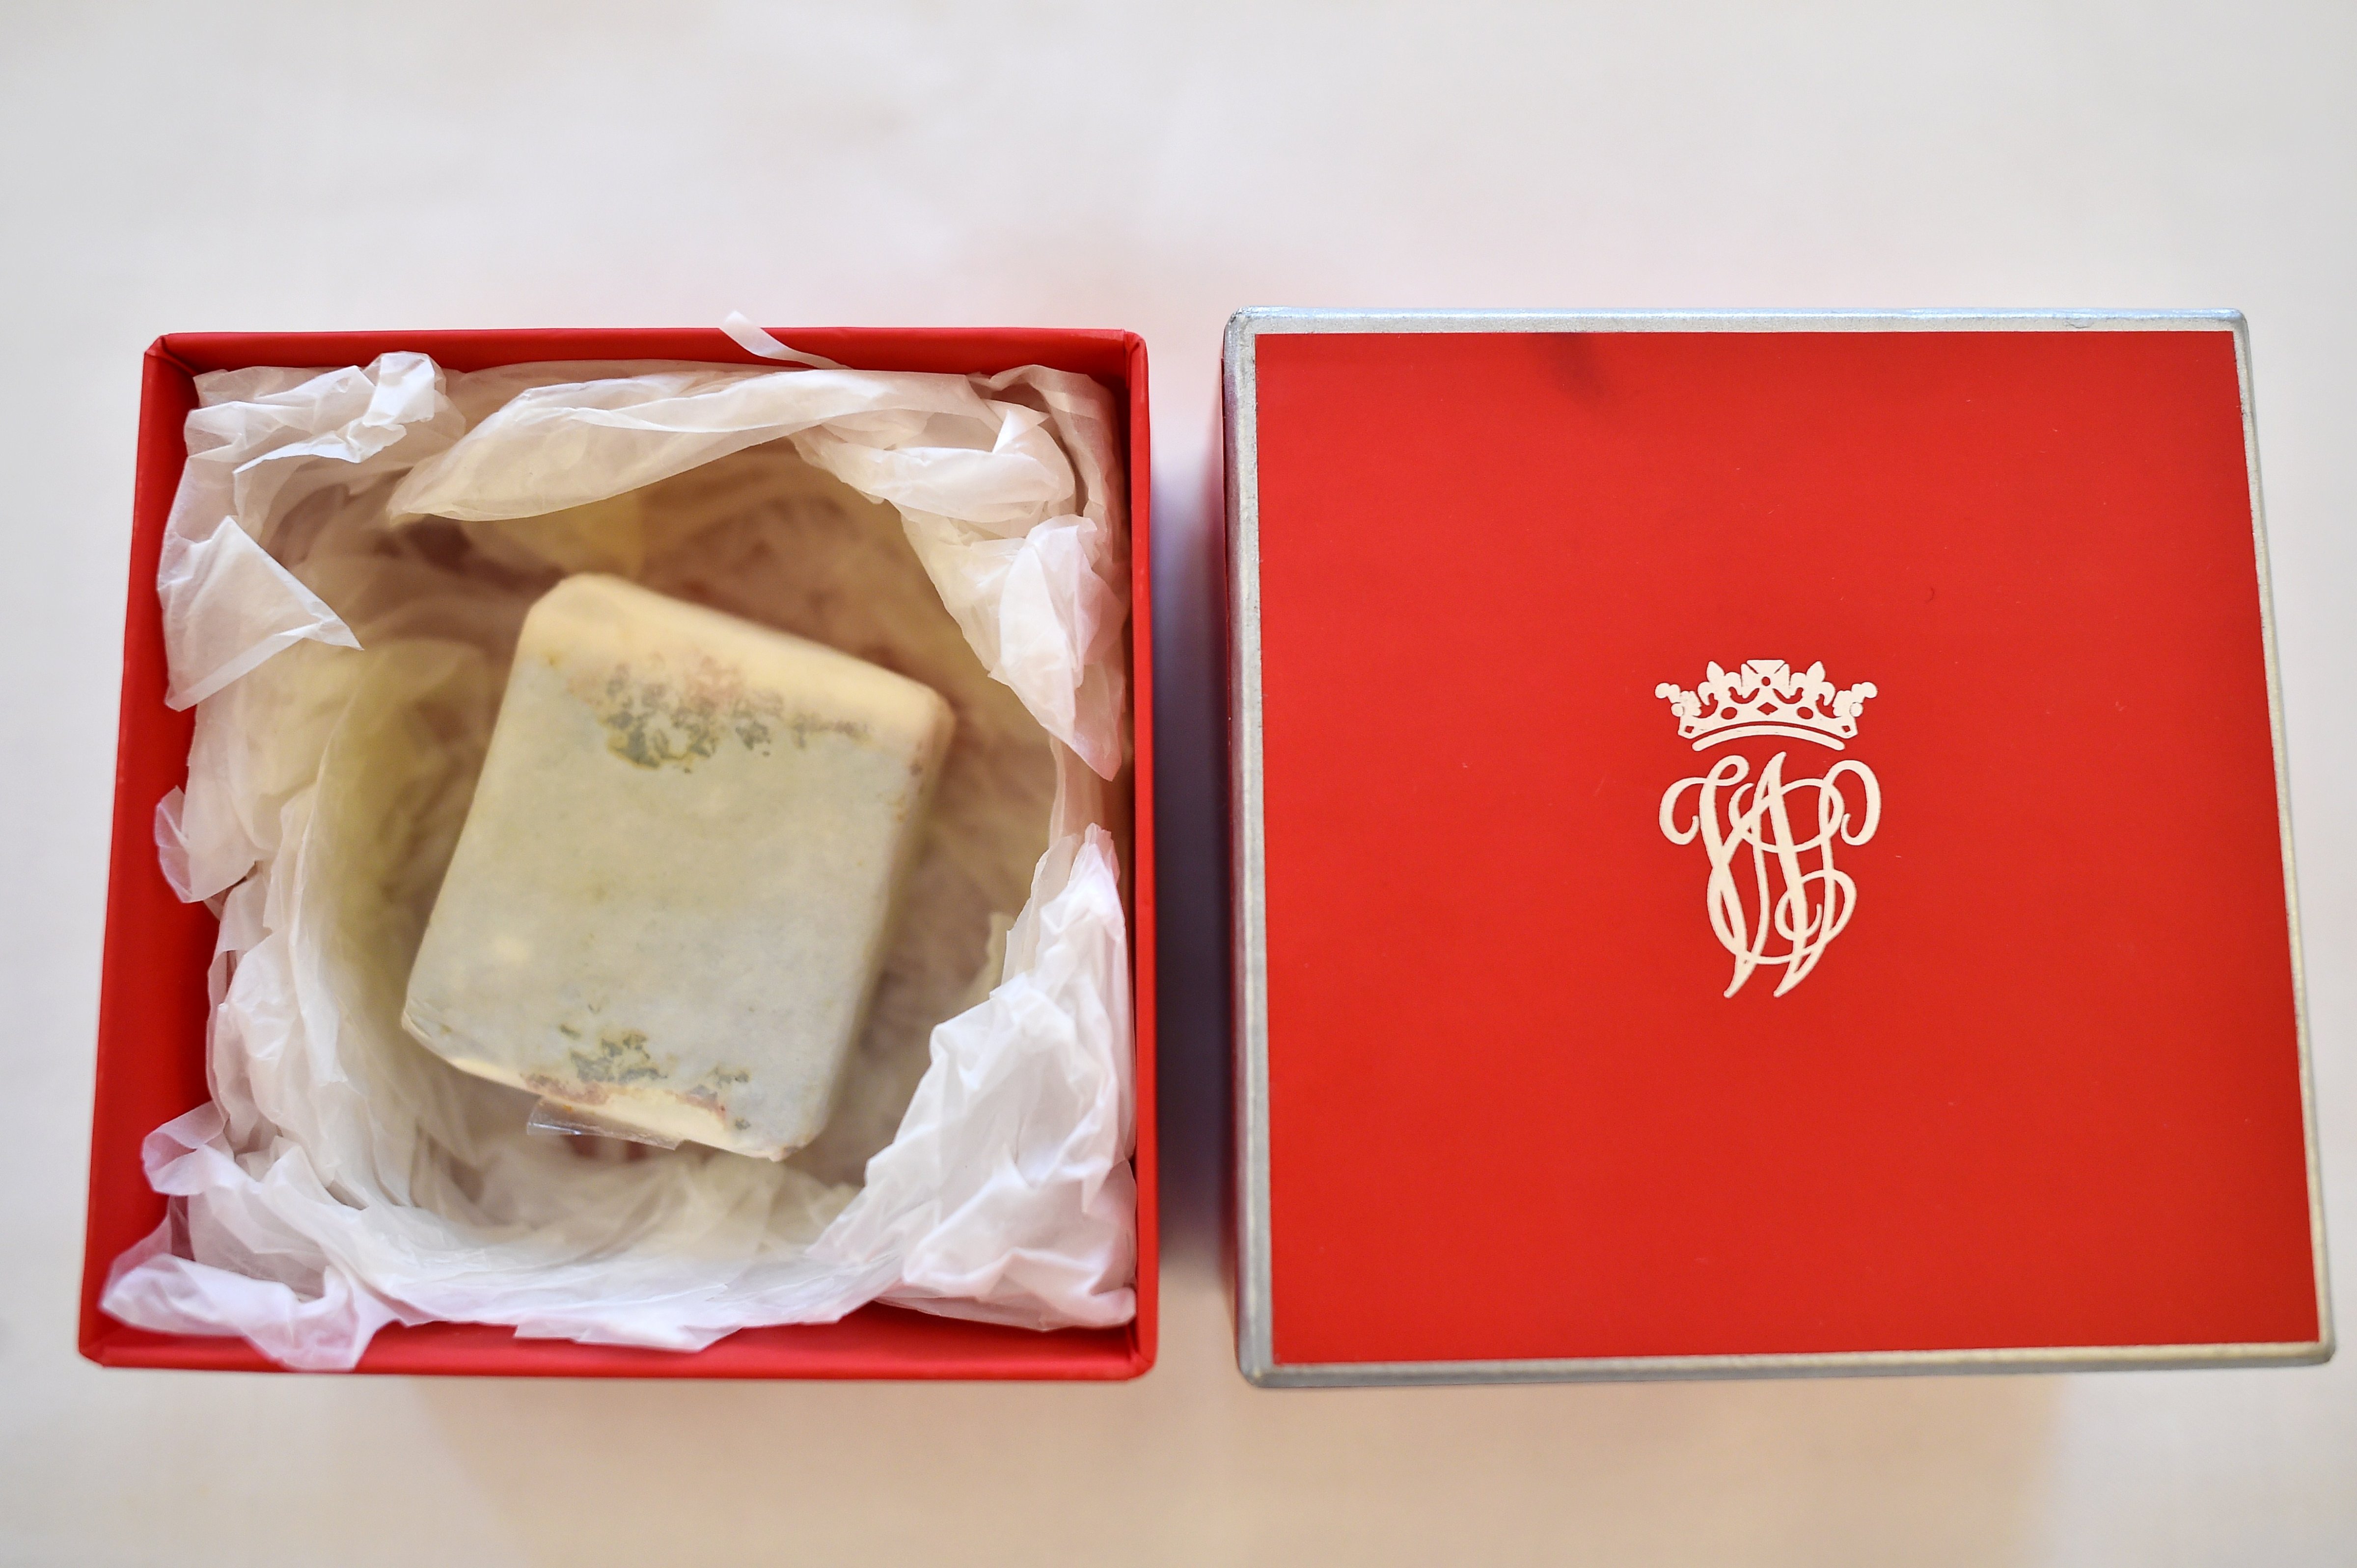 A boxed slice of wedding cake, from the British Royal wedding of Prince William, Duke of Cambridge to Britain's Catherine, Duchess of Cambridge, collected by Leonard Massey, the former first chauffeur to Britain's Queen Elizabeth II, is displayed at the Stafford Hotel in London on June 5, 2015, ahead of its auction in Beverly Hills, US, on June 27. (BEN STANSALL—AFP/Getty Images)